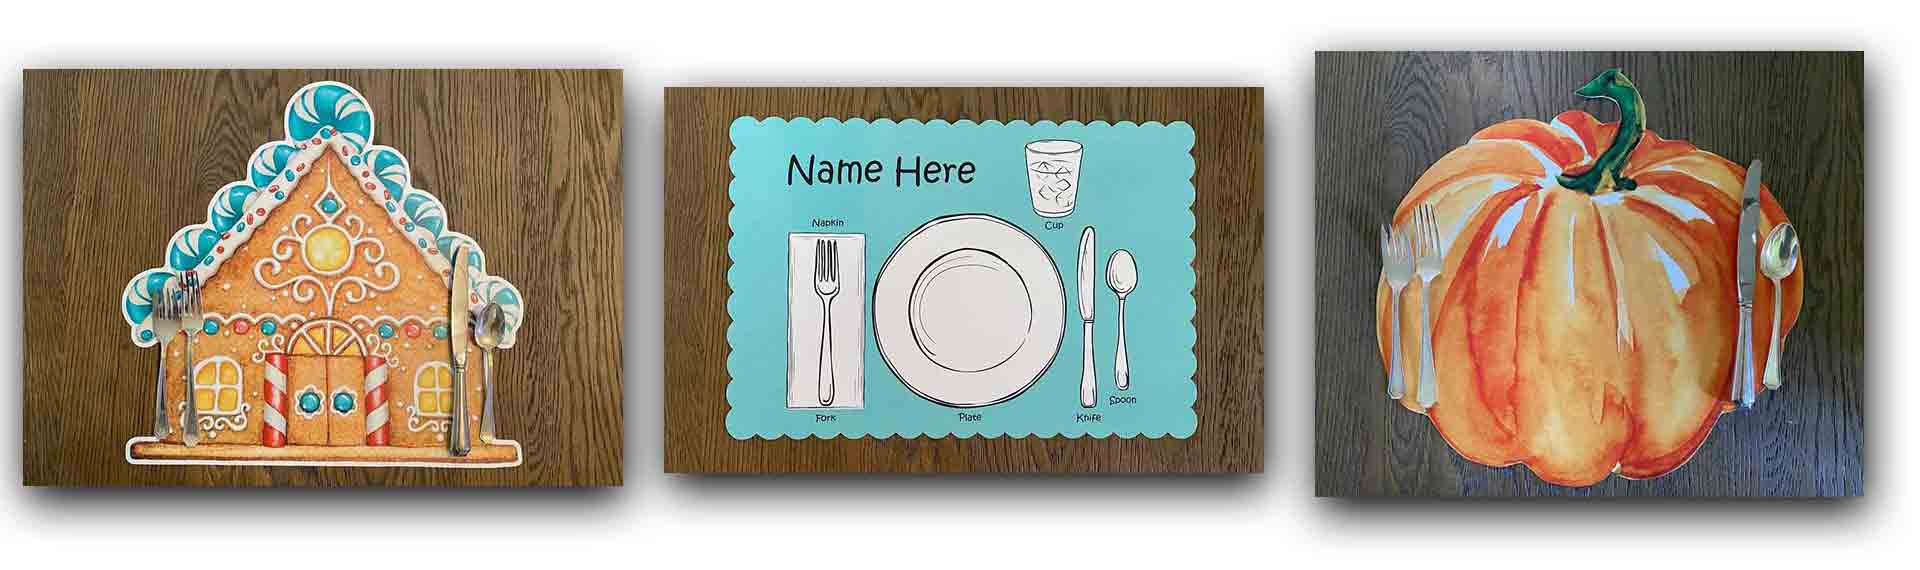 unbeLEAFable Designs wholesale placemats